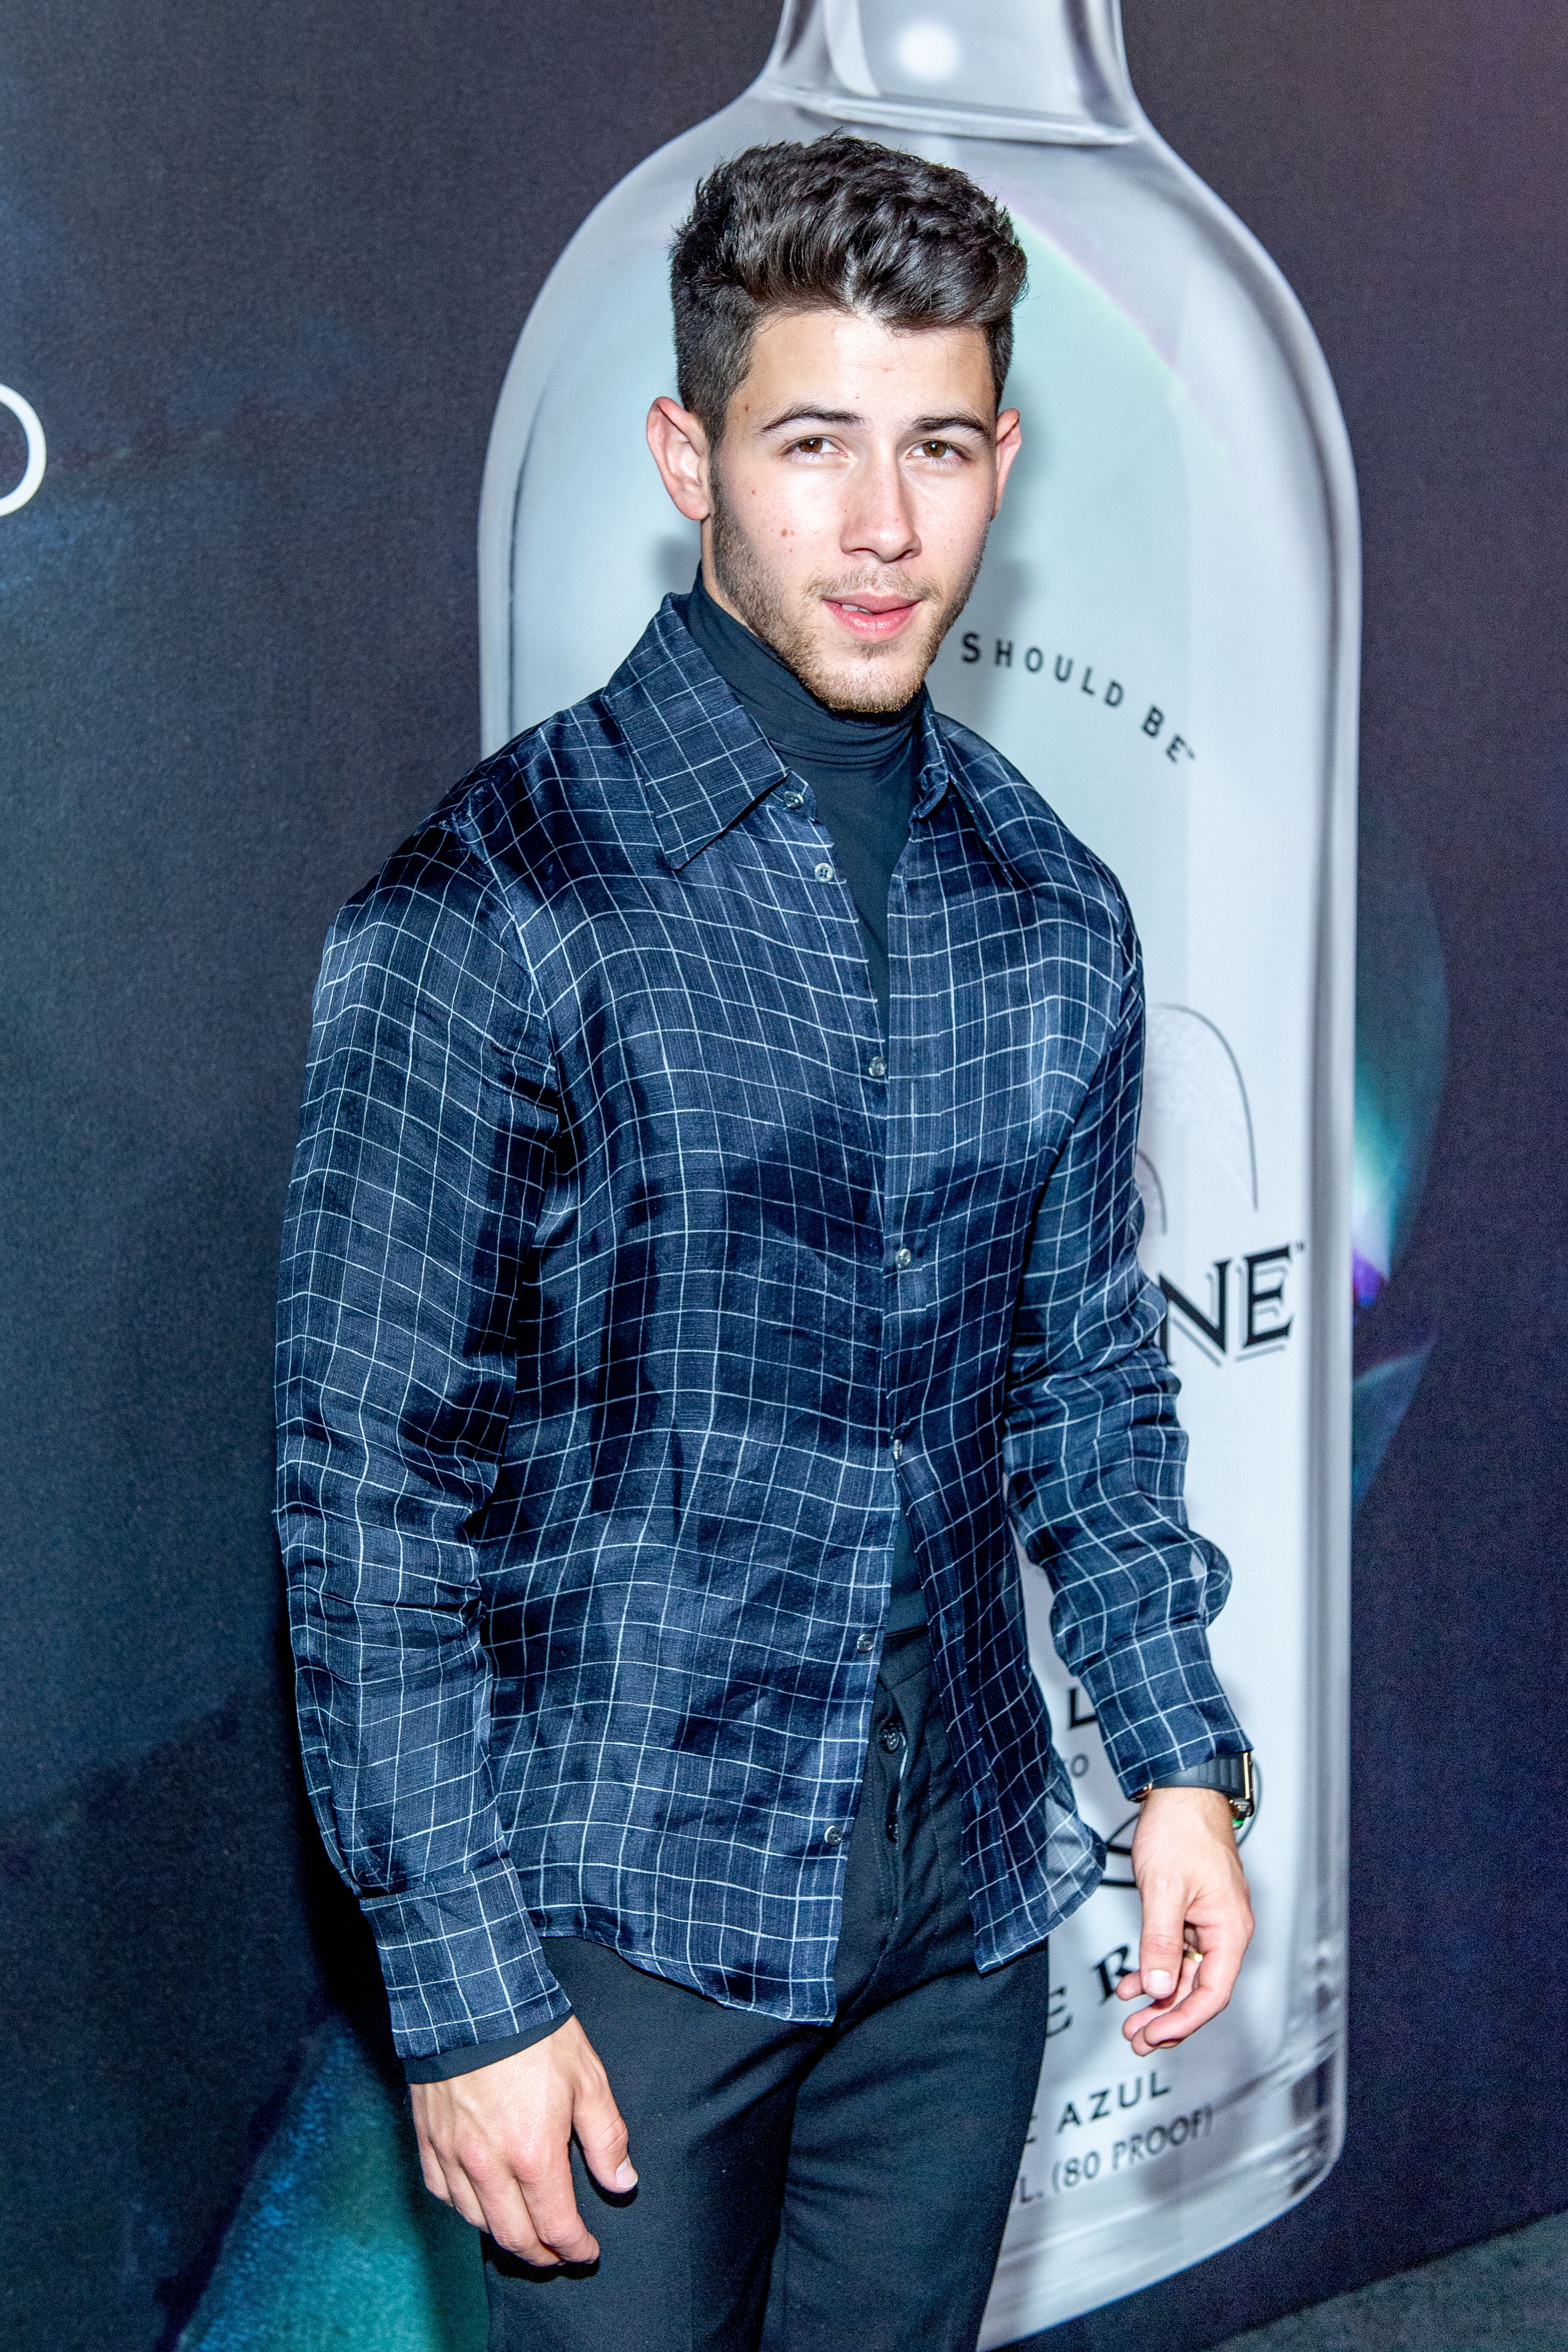 Nick Jonas attends Nick Jonas x John Varvatos Villa One Tequila Launch at John Varvatos Bowery NYC on August 29, 2019 in New York City | Source: Getty Images